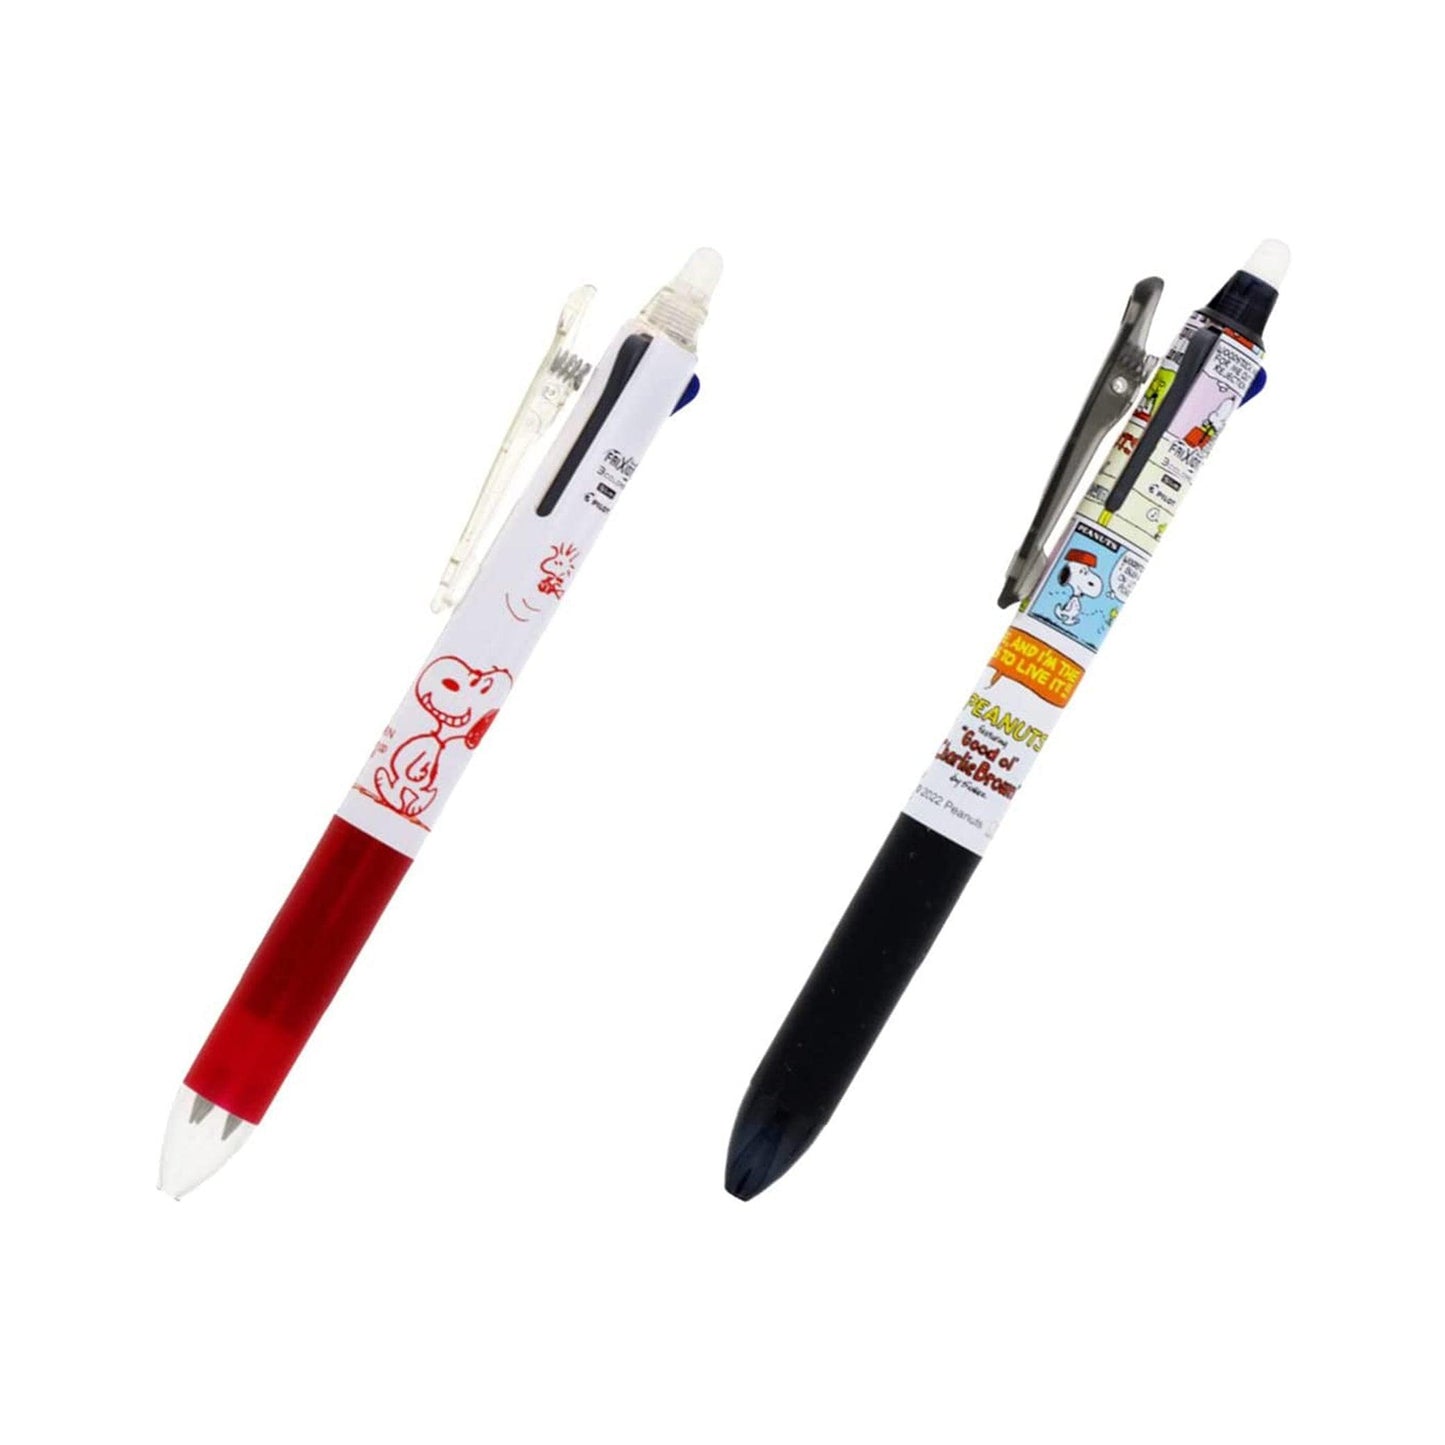 Ball Pen Erasable SUN-STAR x PILOT Frixion Ball Snoopy 3 Colors Stationery Cartoon Student School Office S4652 - CHL-STORE 